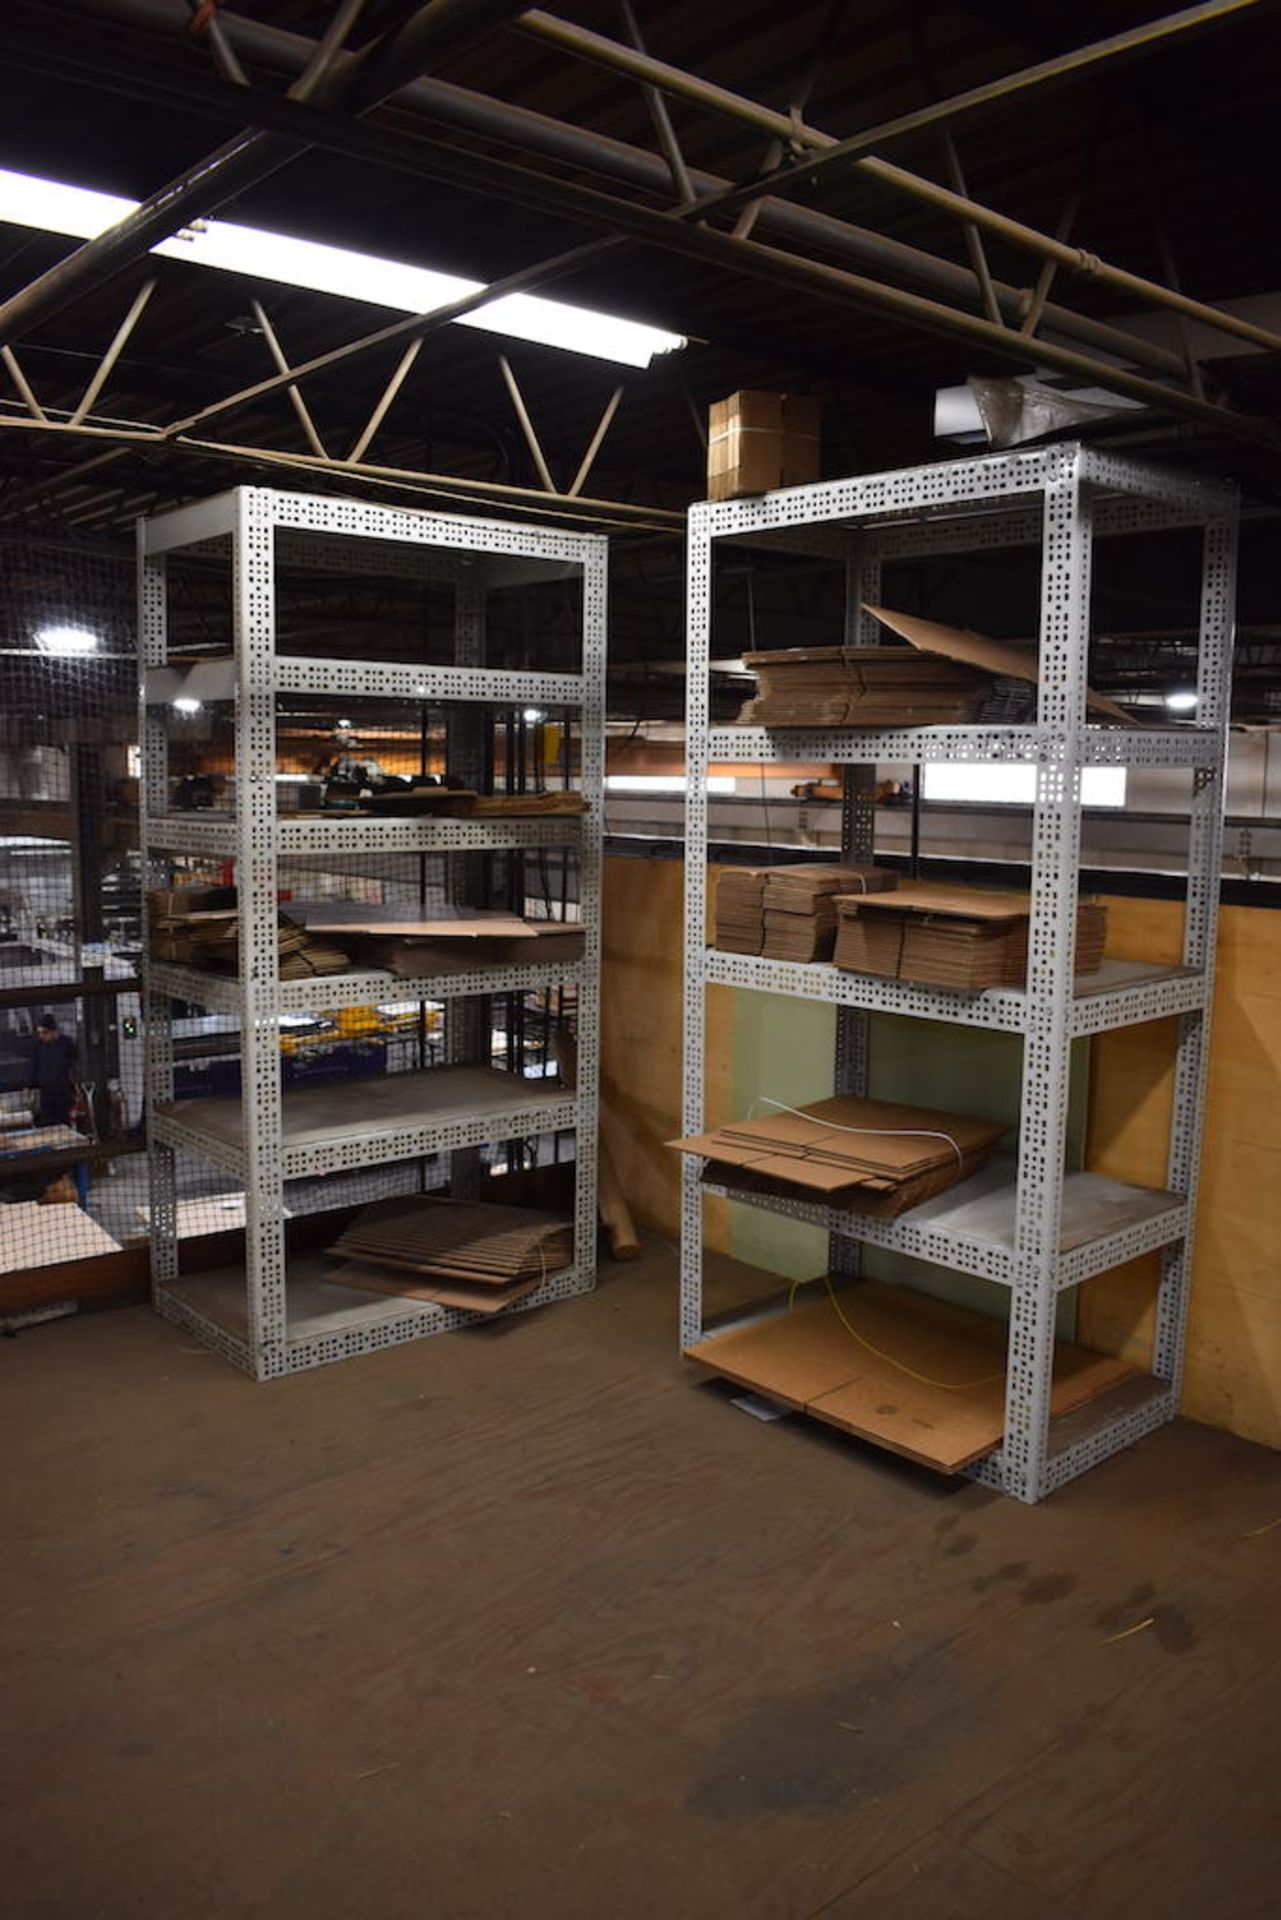 ASSORTED WORK BENCHES, FILE CABINETS, METAL SHELVING AND STORAGE CABINETS IN UPSTAIRS MEZZANINE. ( - Image 8 of 9